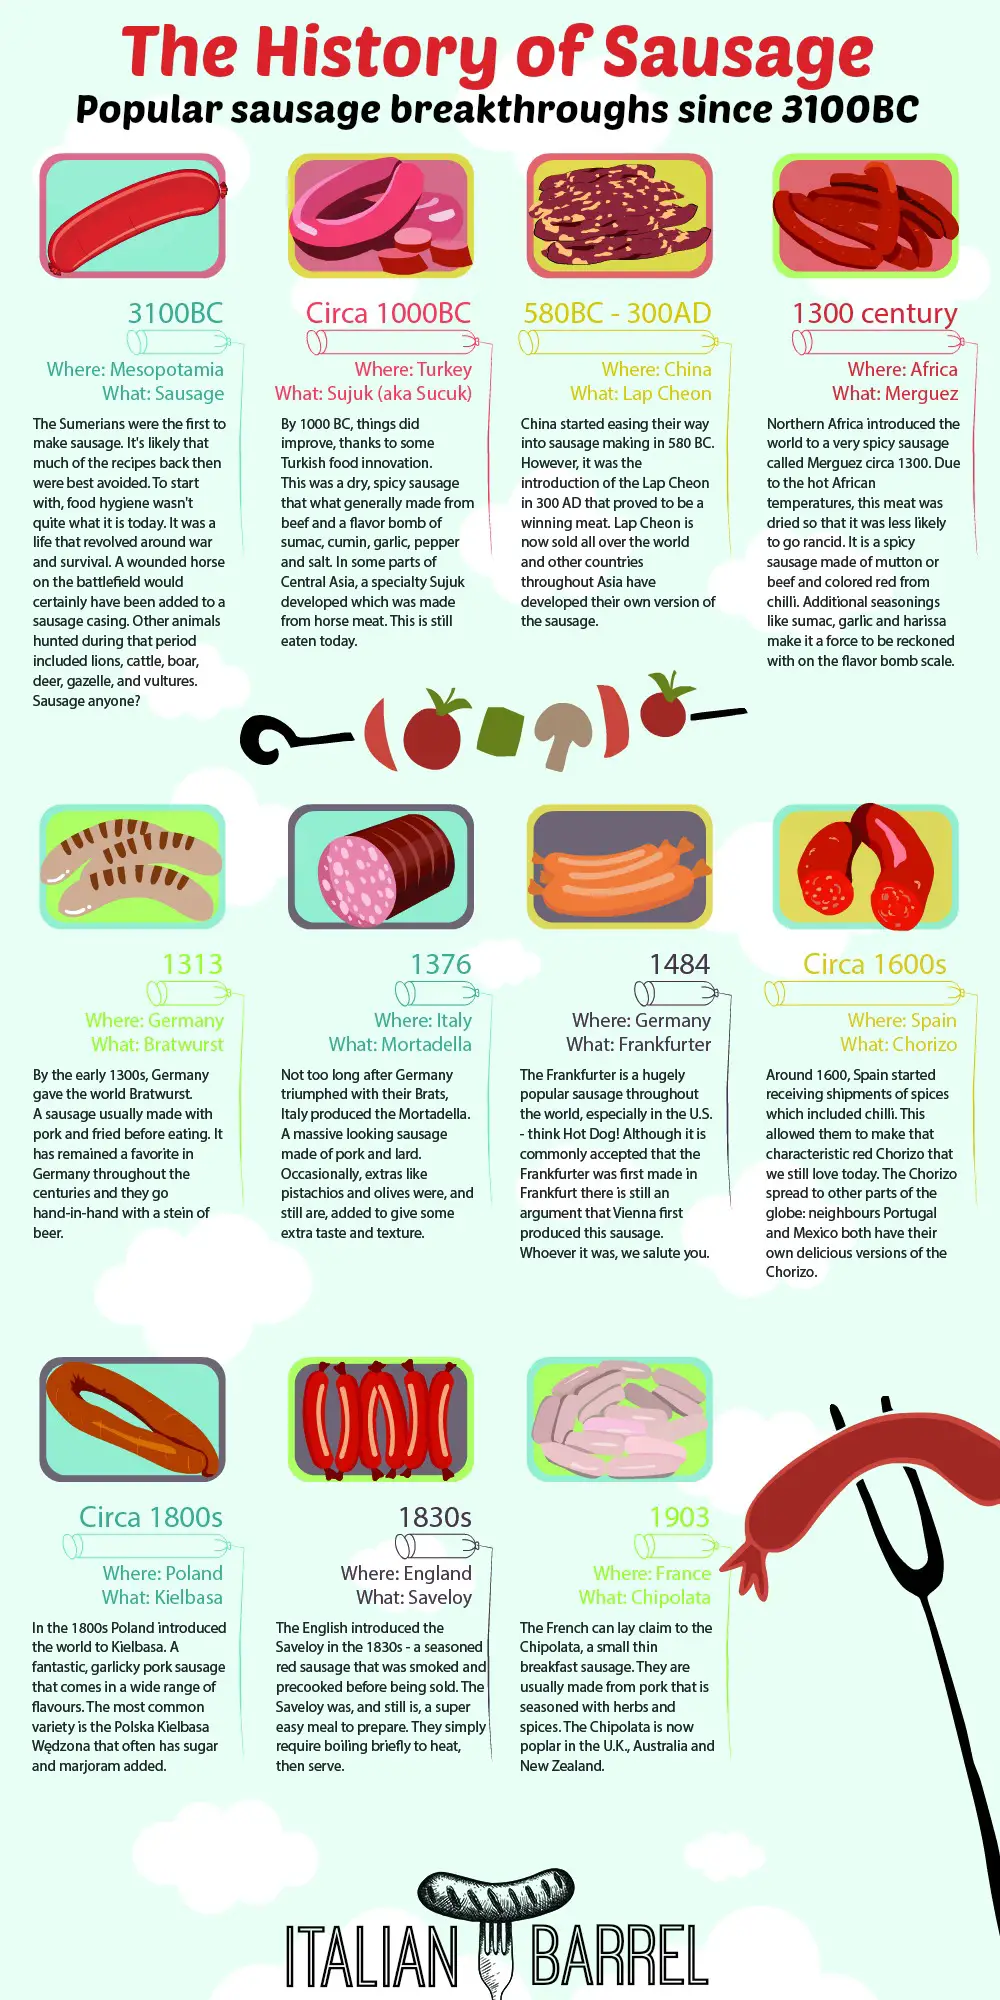 The History of Sausage Infographic